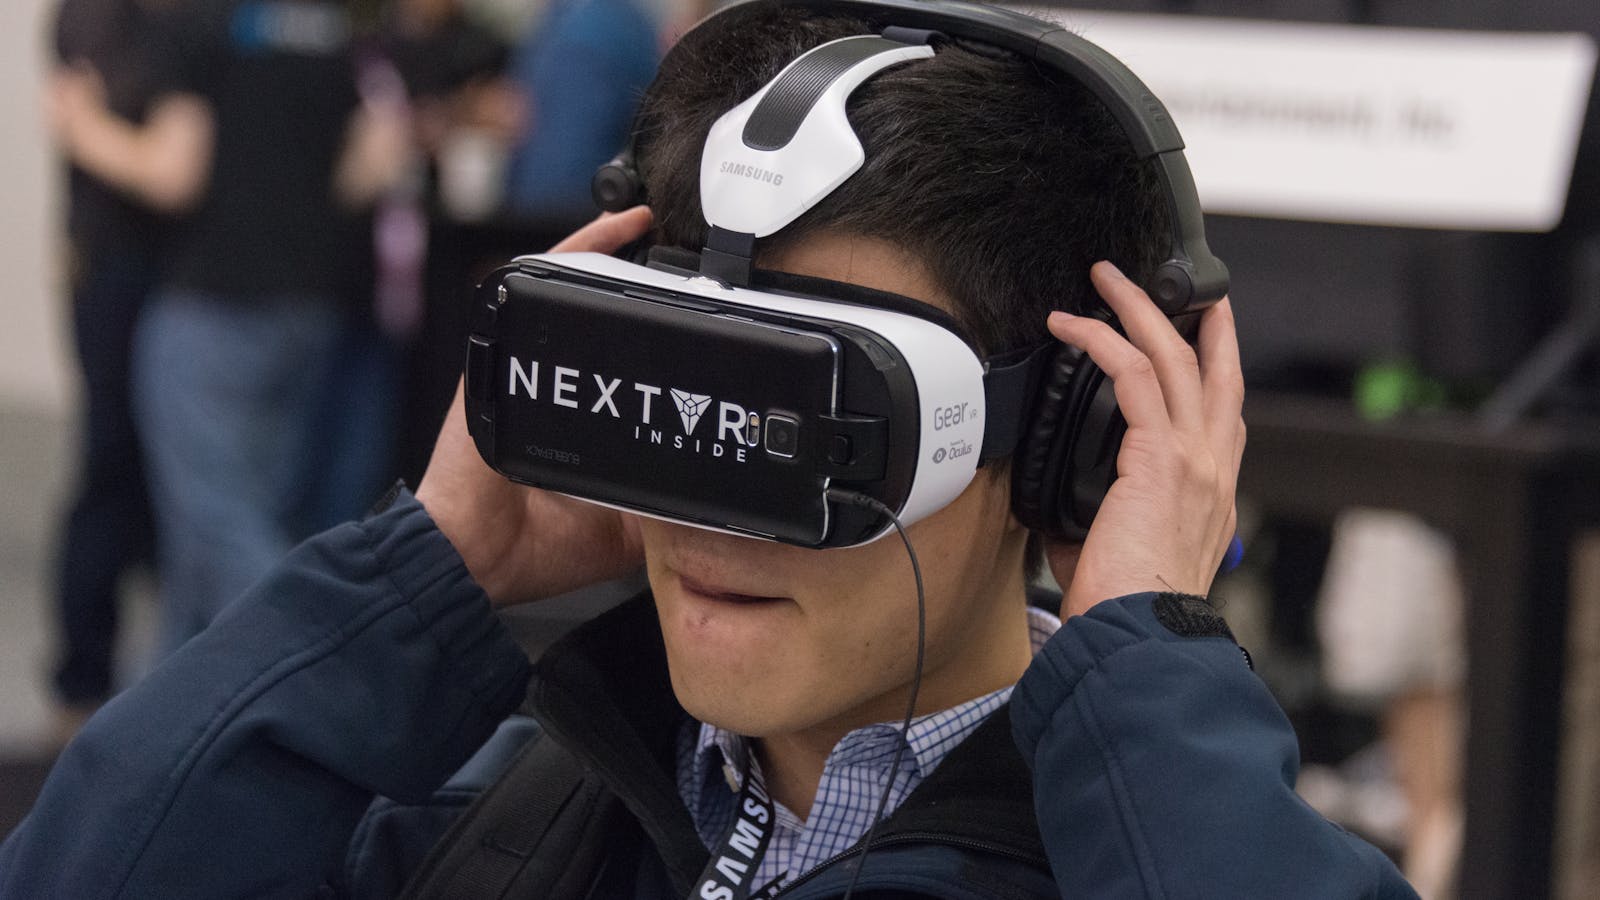 An attendee at a convention trying out NextVR software on a Gear VR headset. Photo by Flickr/eVRydayVR.